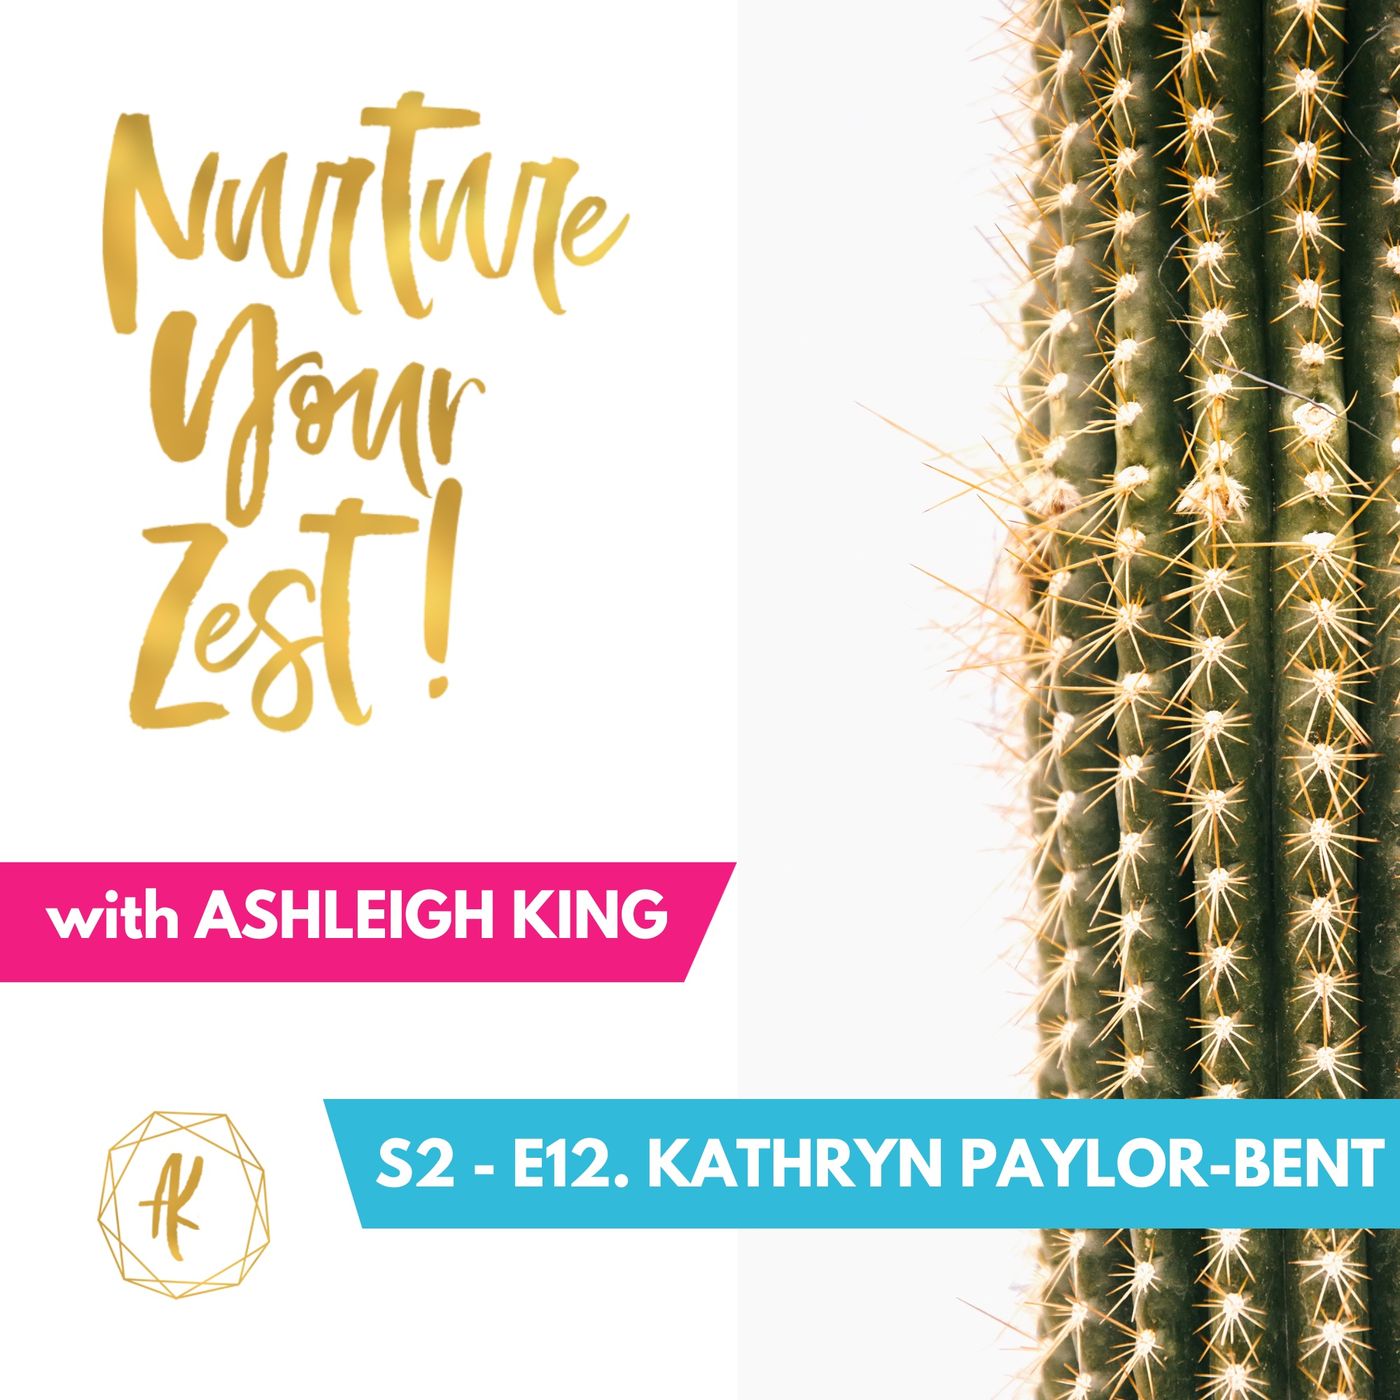 #NurtureYourZest S2-E12 Kathryn Paylor-Bent chats to Ashleigh King on Becoming Disabled, Motherhood, Accessibility and the Purple Pound